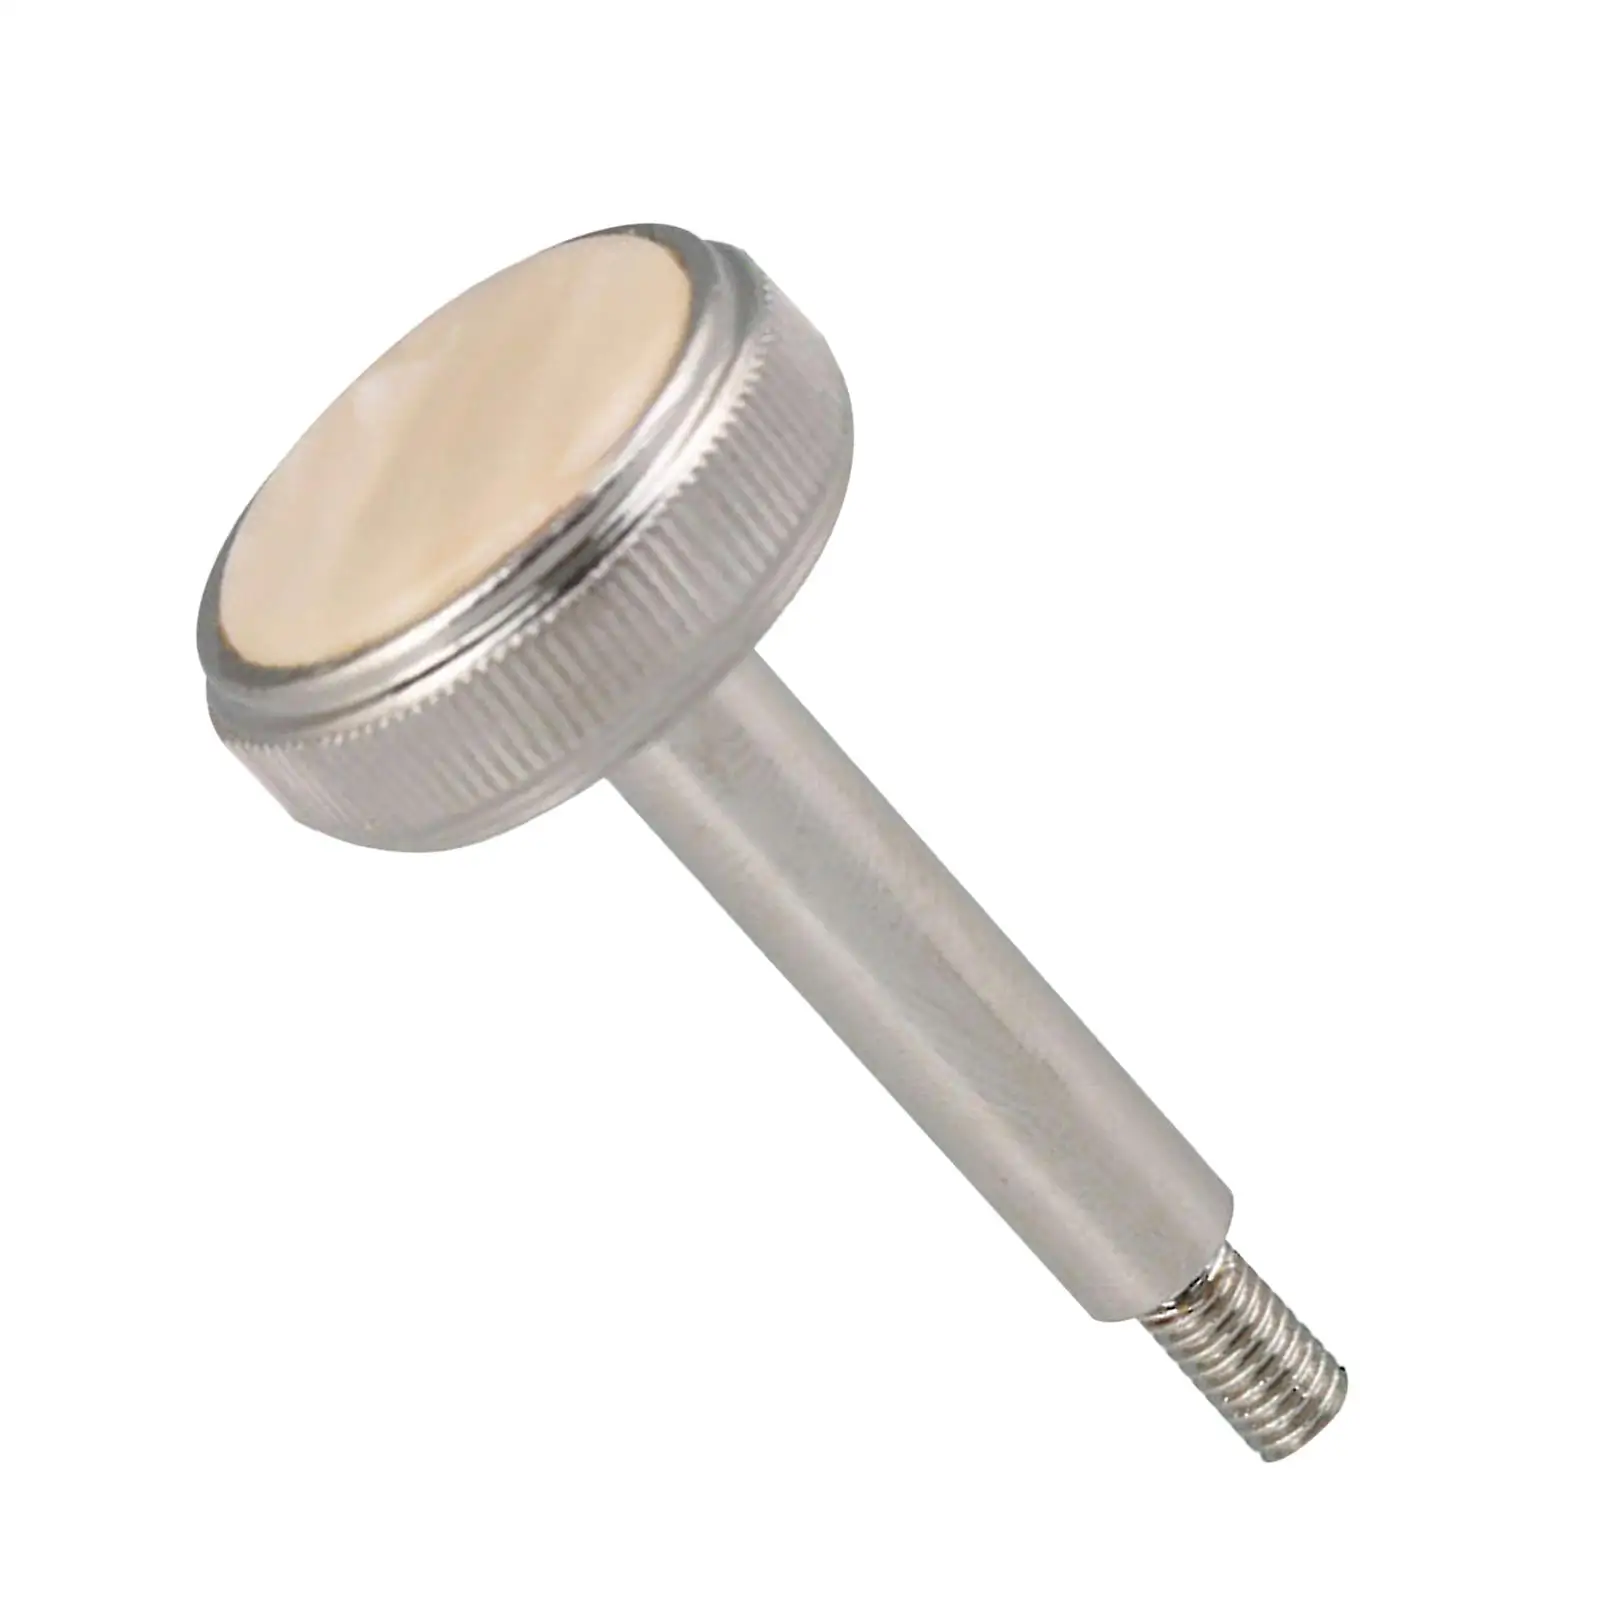 Baritone Trumpet Finger Buttons Replace Repair Tool for Maintainance Tuba